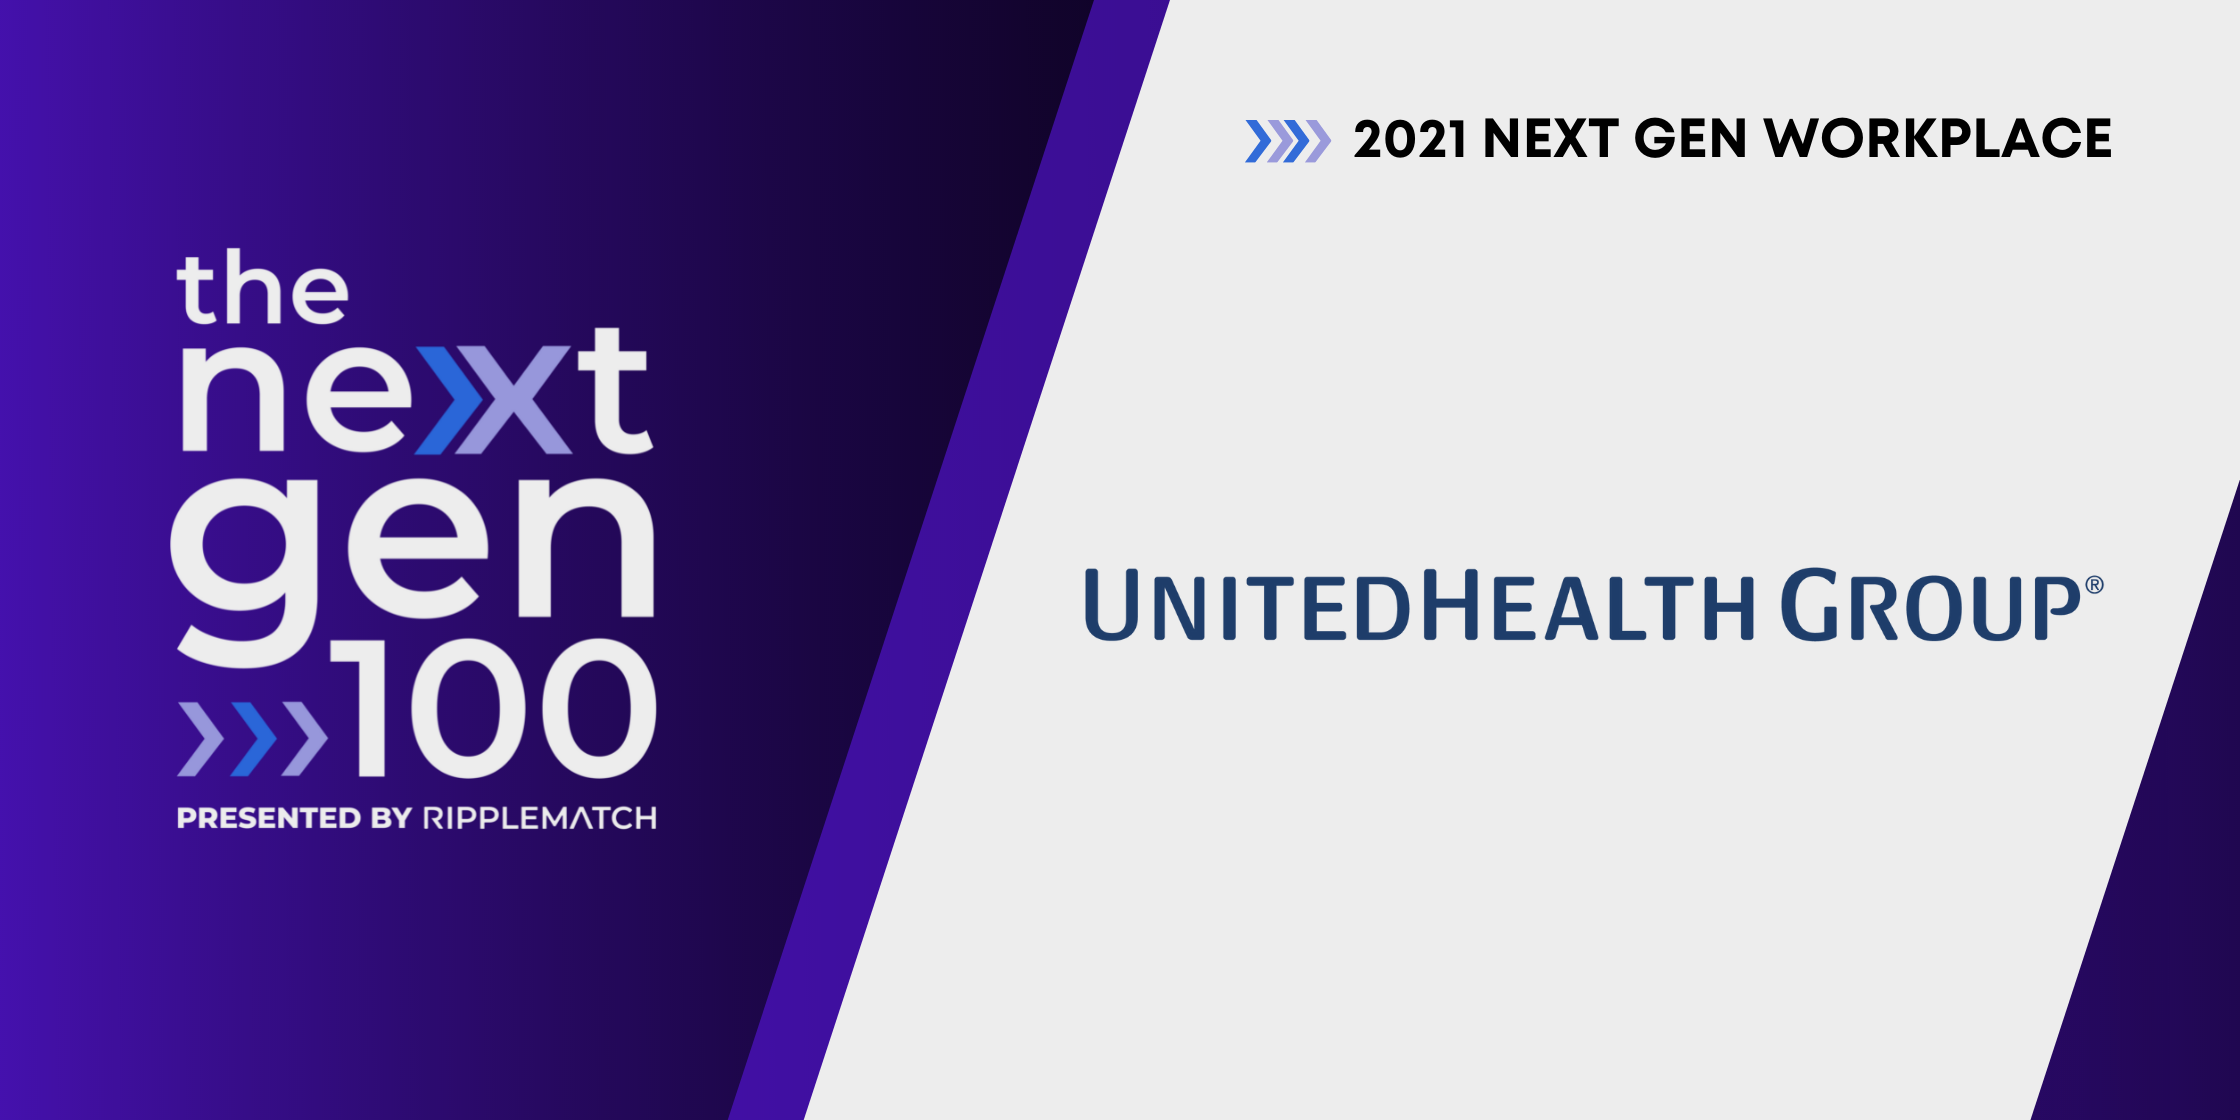 UnitedHealth Group is a Top 100 Next Gen Workplace 2021